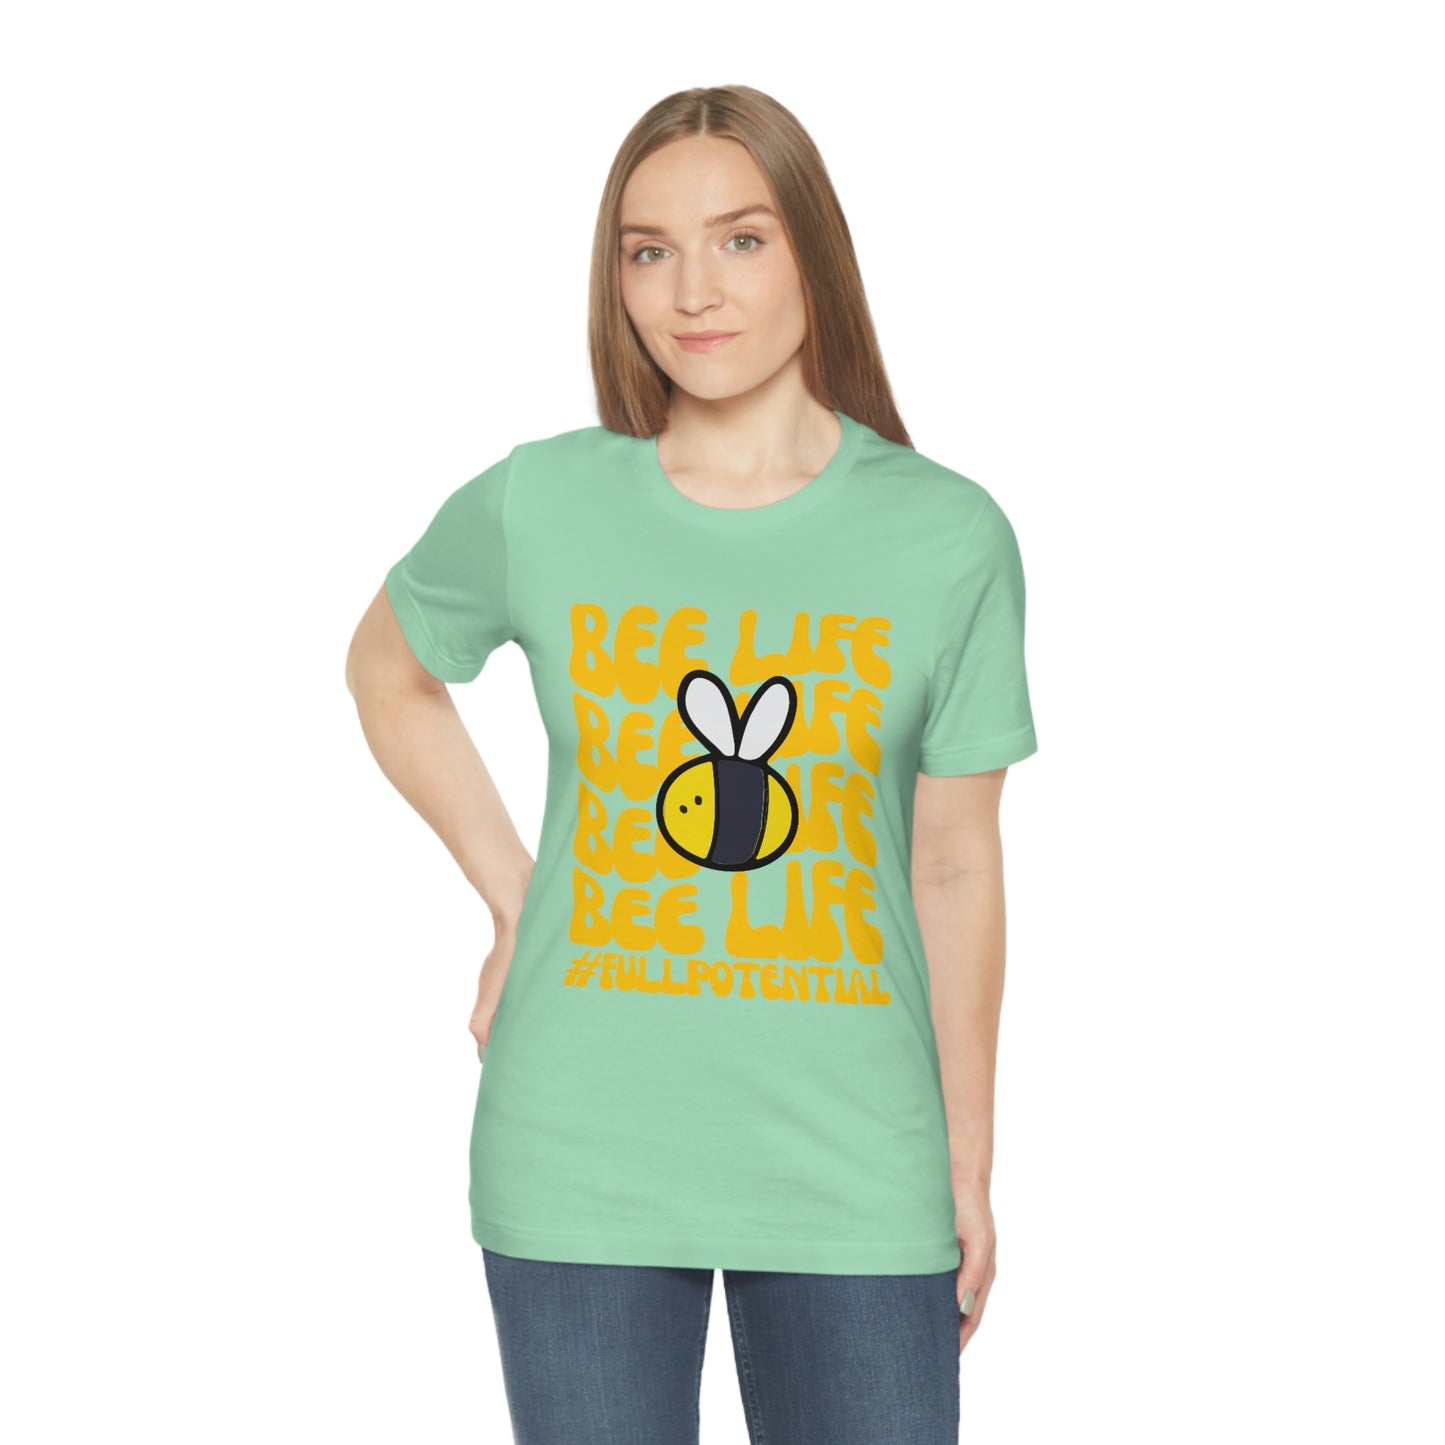 Bee Life Full Potential Style 2